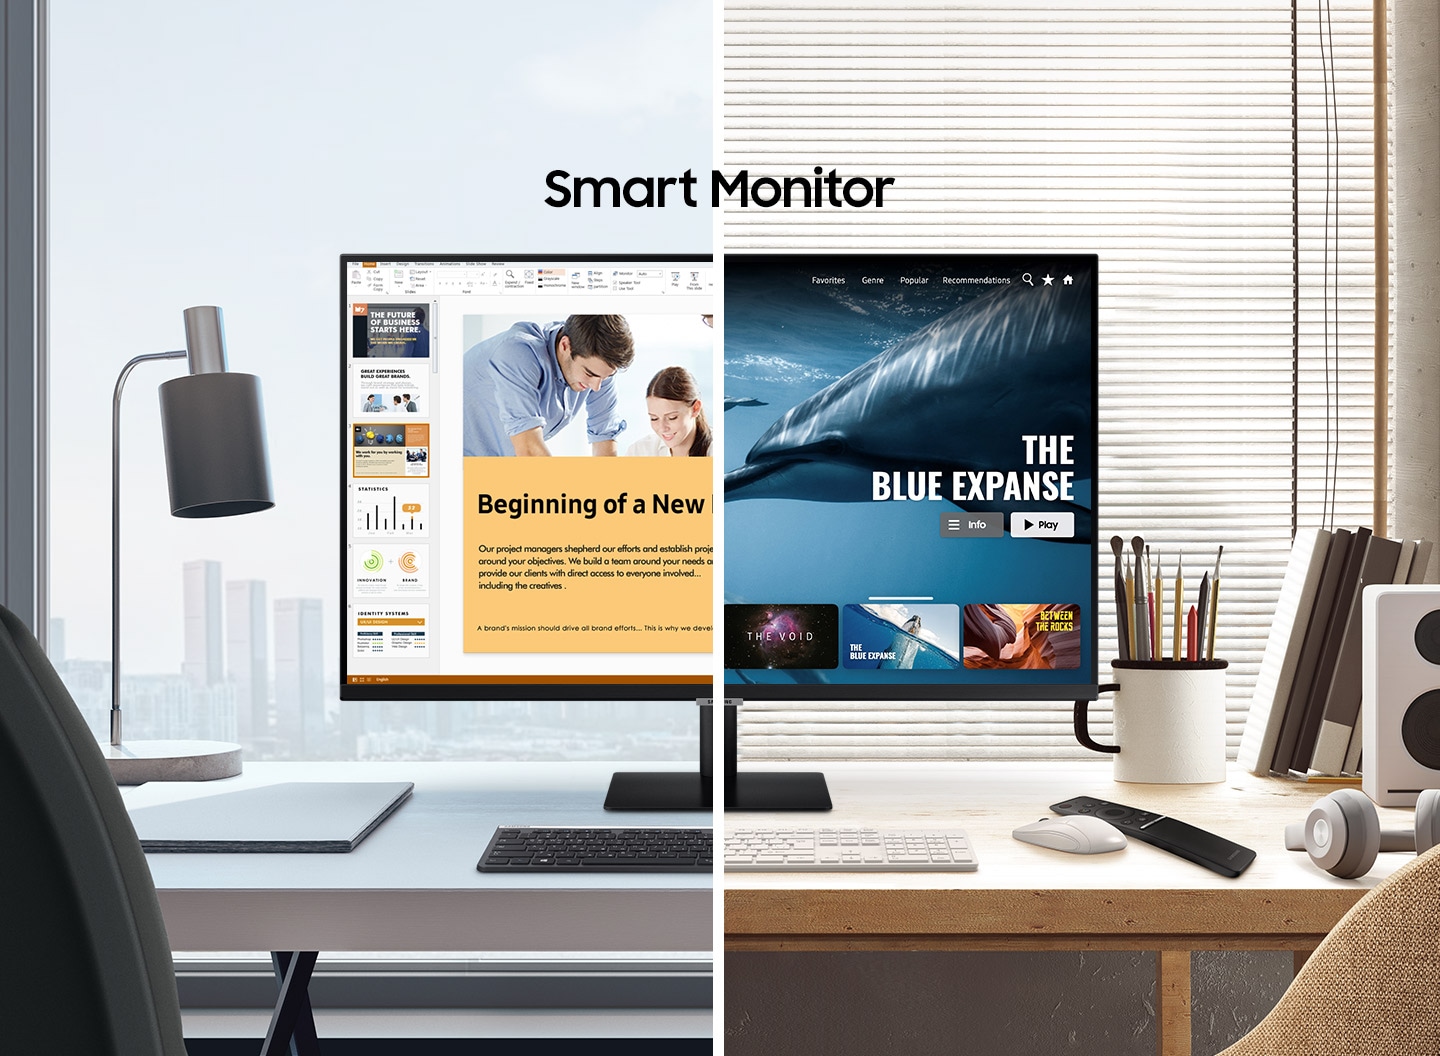 Below the title \One for all,\ a vertical line divides two different images of a monitor. The line slides right to reveal an office desk with powerpoint on the monitor and the words \Work Smart\, and slides left to reveal a home desk with a movie playing on the monitor and the words \Play Smart.\